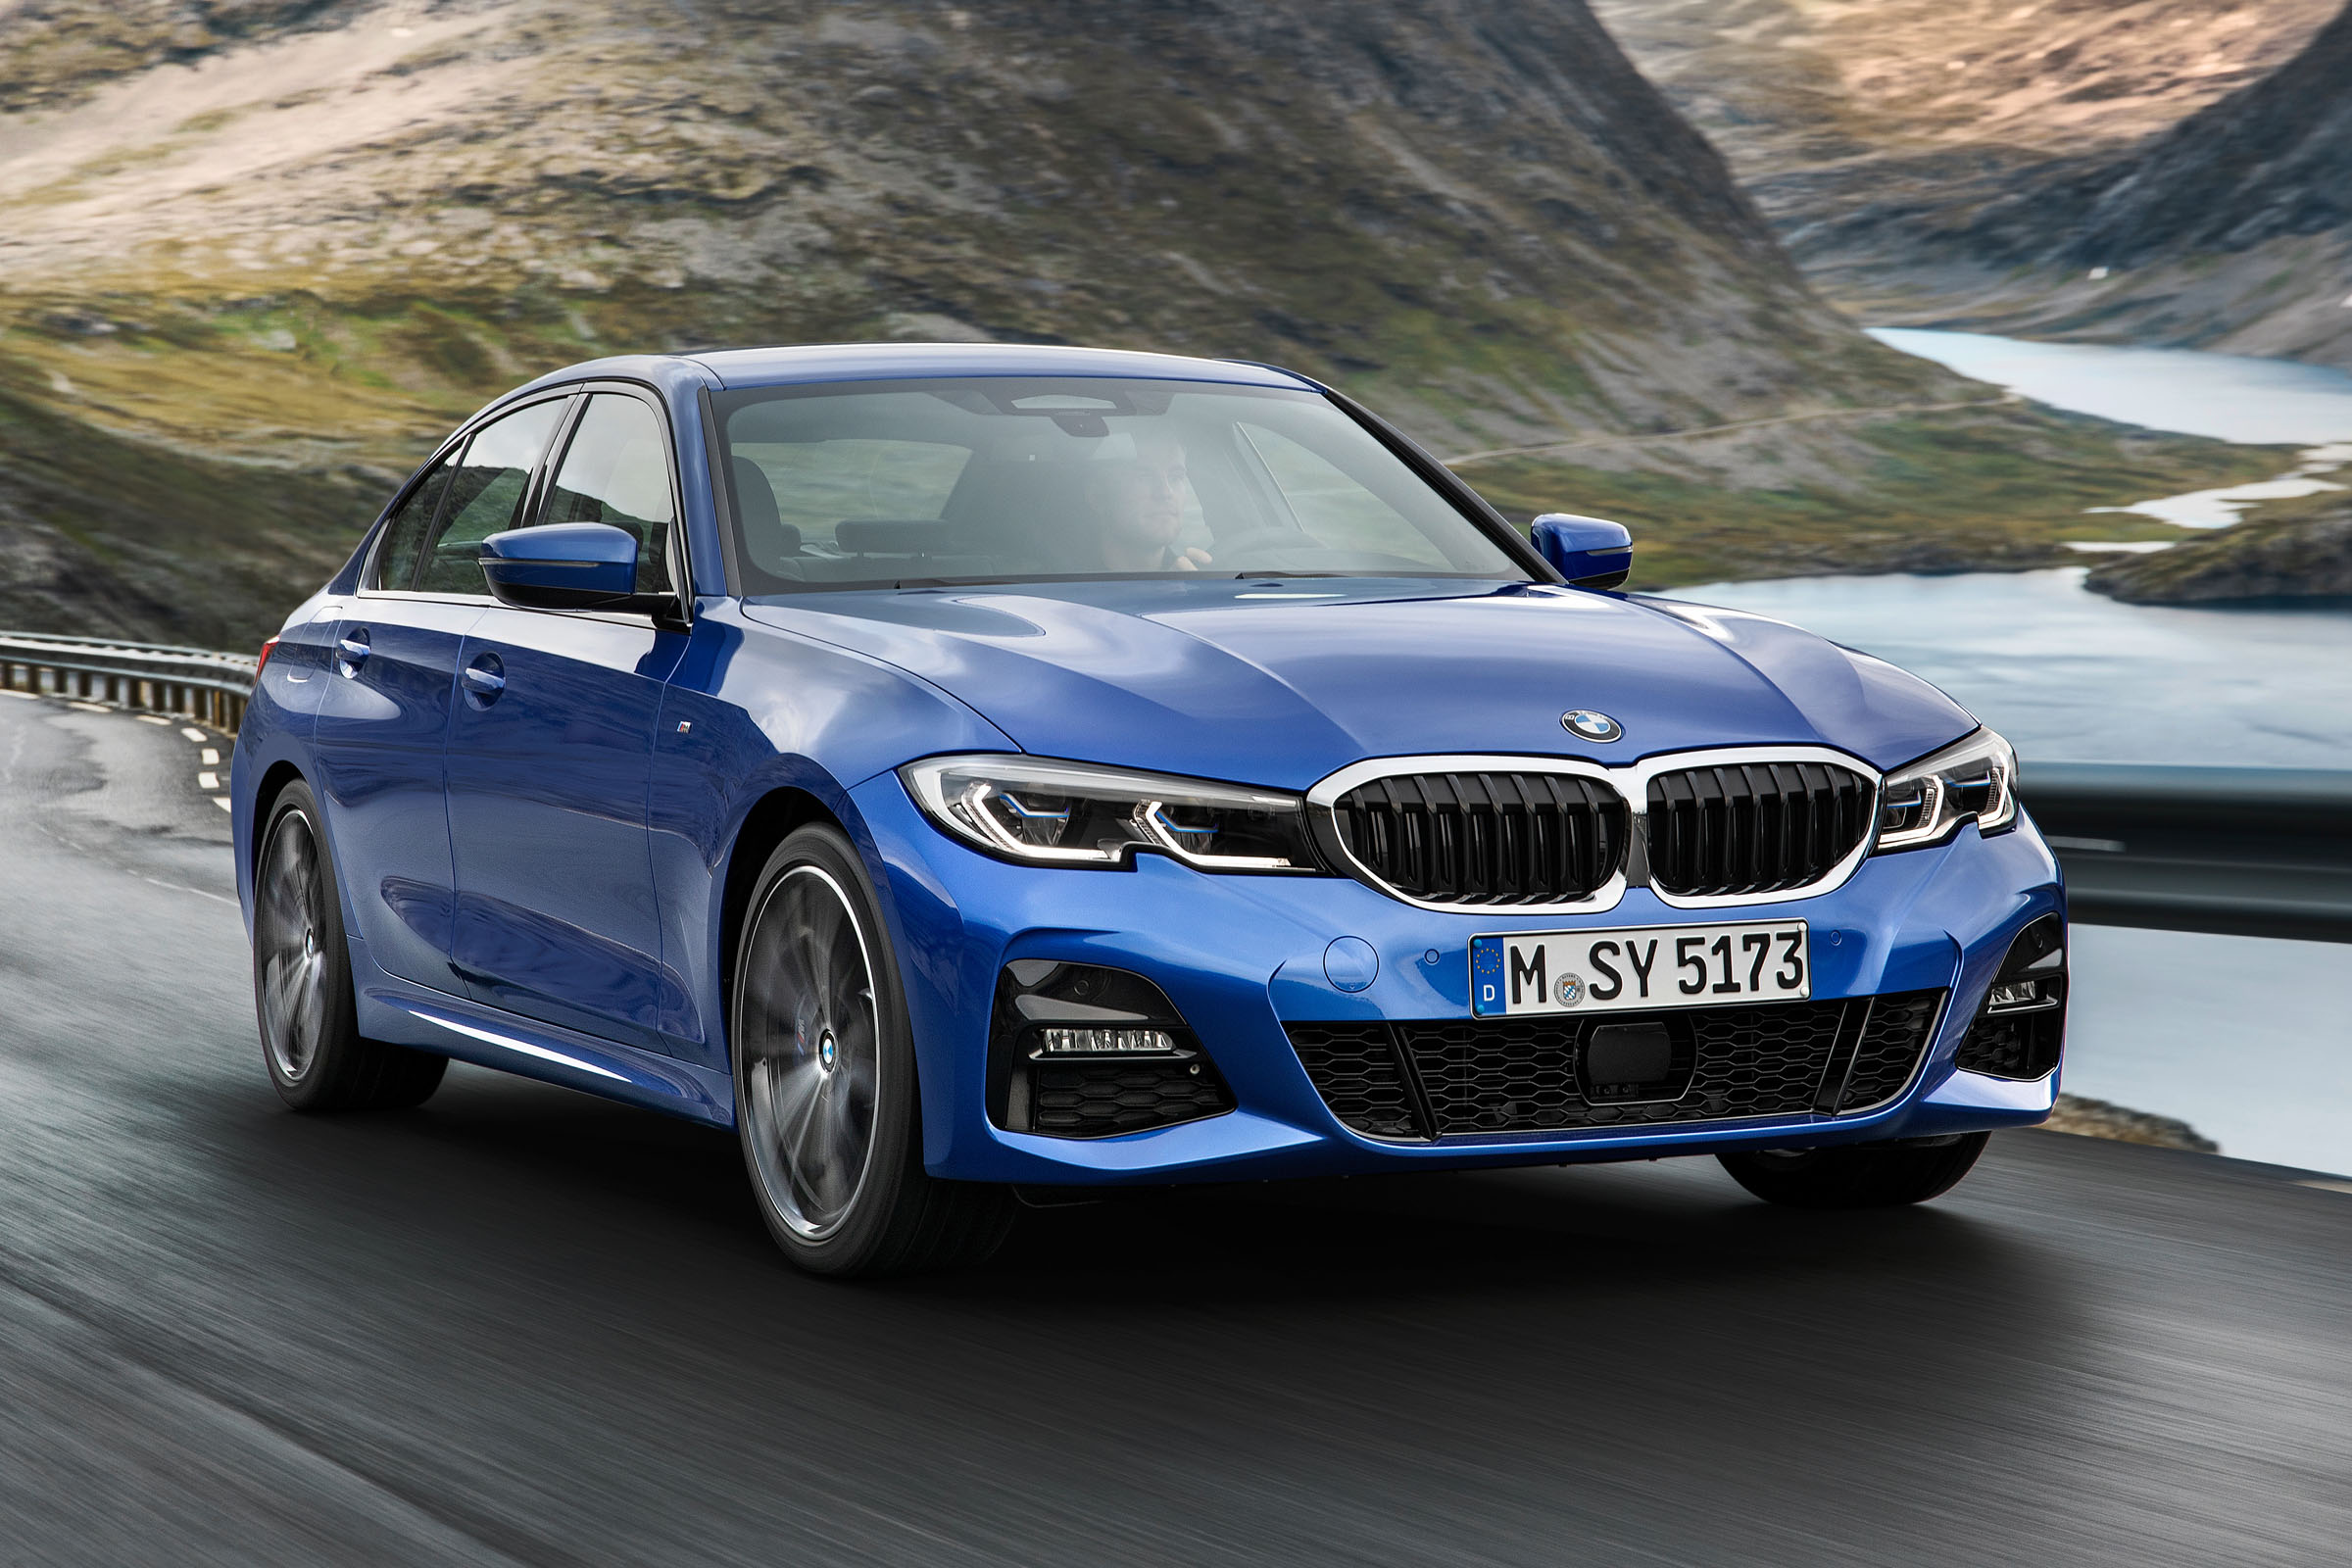 New BMW 3 Series 2019 prices, details and onsale date